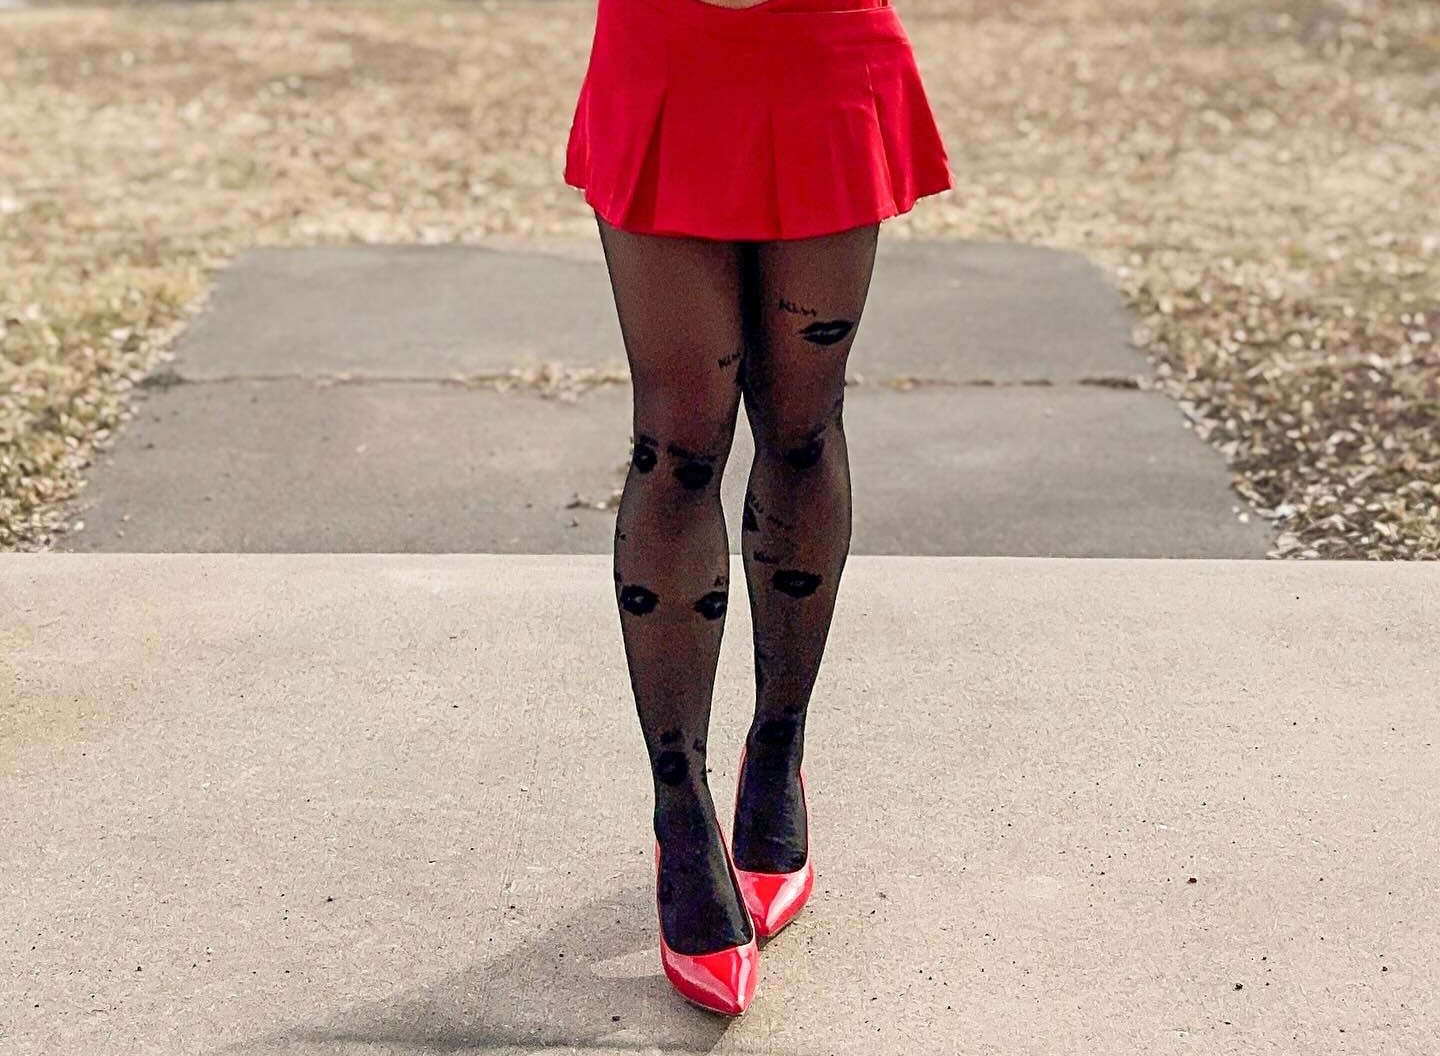 A stylish lady pairs a red mini skirt with a pair of red shoes